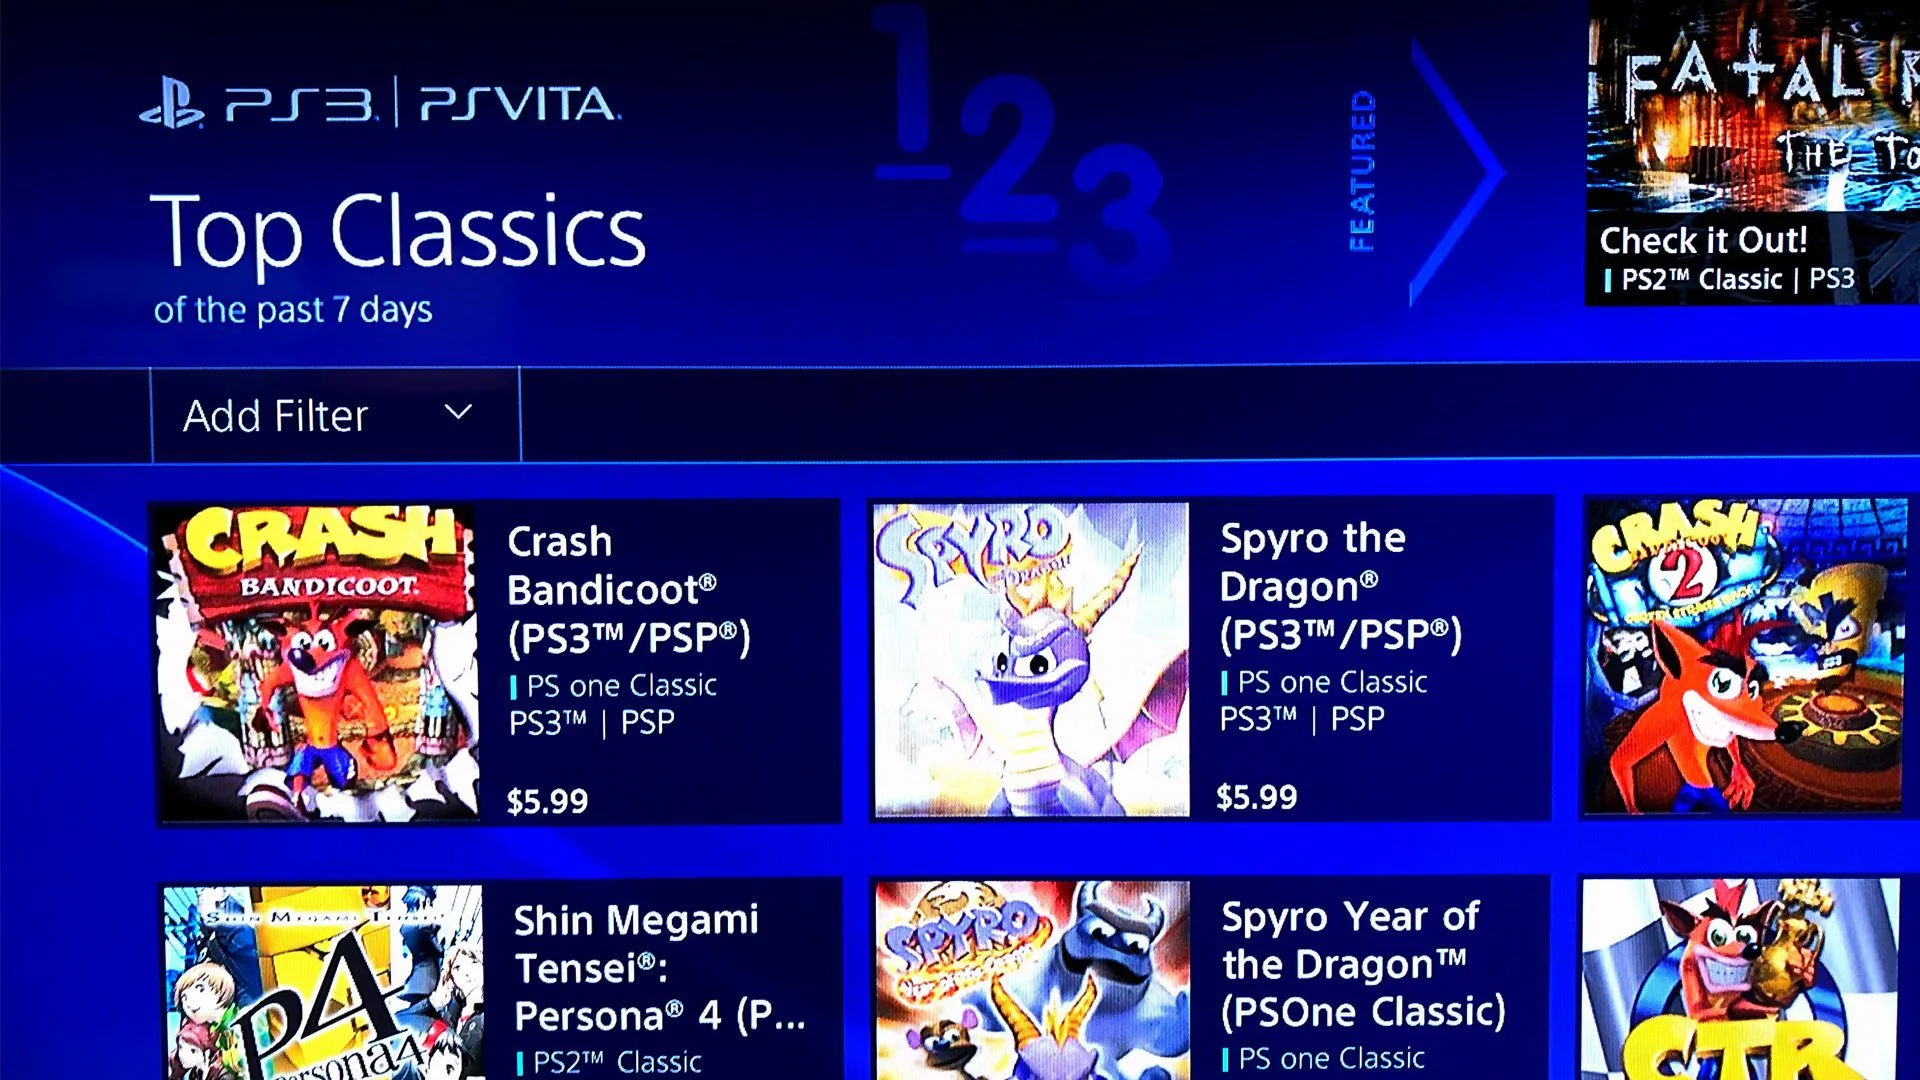 PS3 and PS Vita stores are dropping credit card and PayPal support